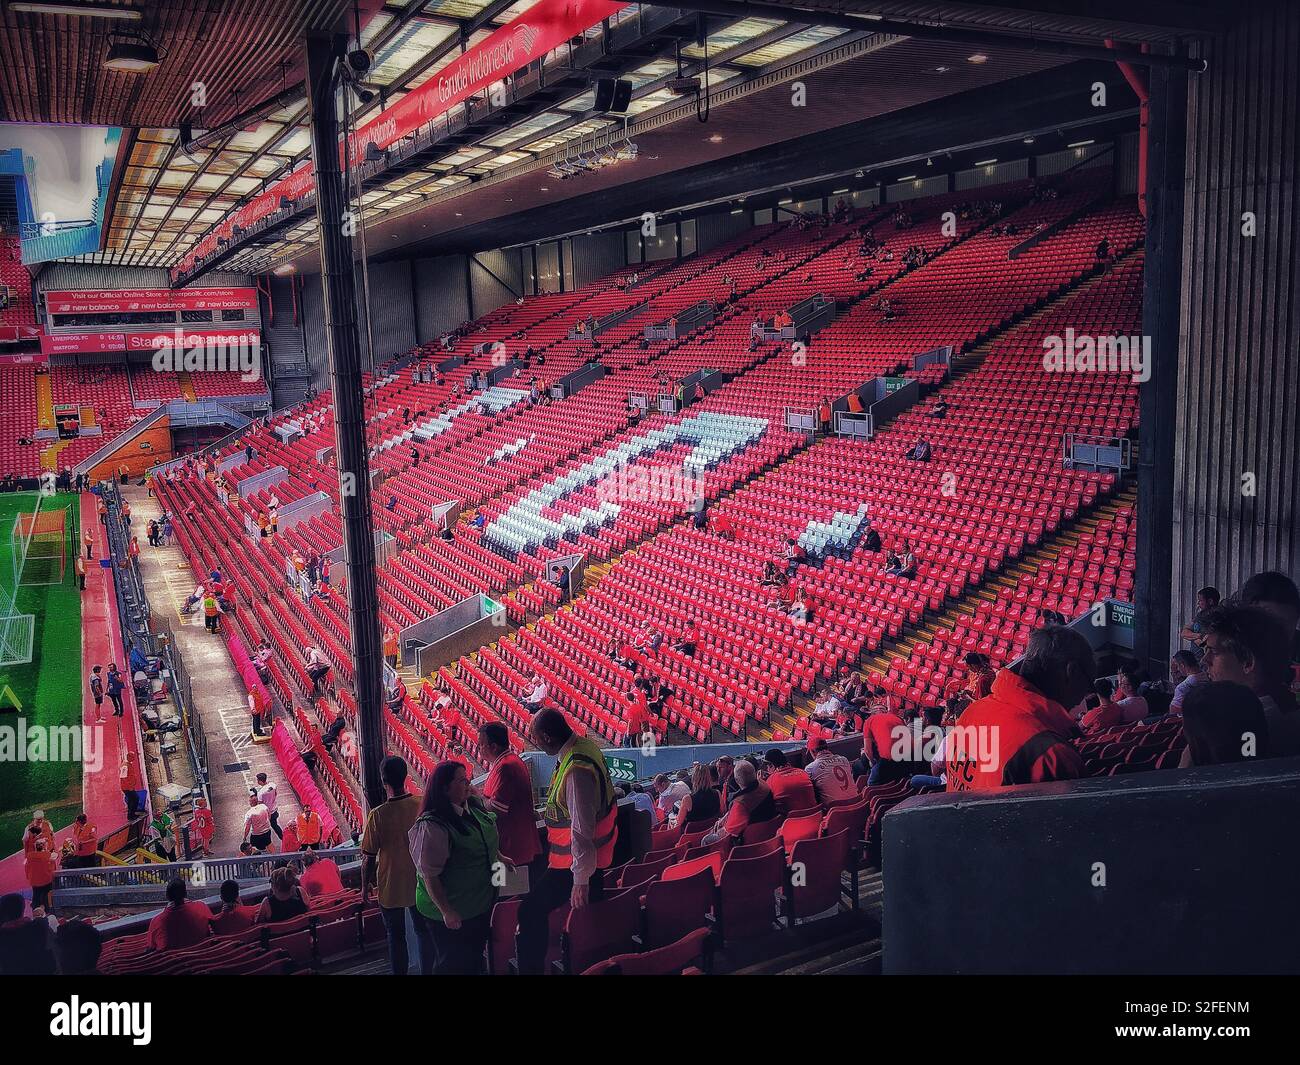 Den Kop Ende stand in der Liverpool Football Club Anfield Stadion Stockfoto